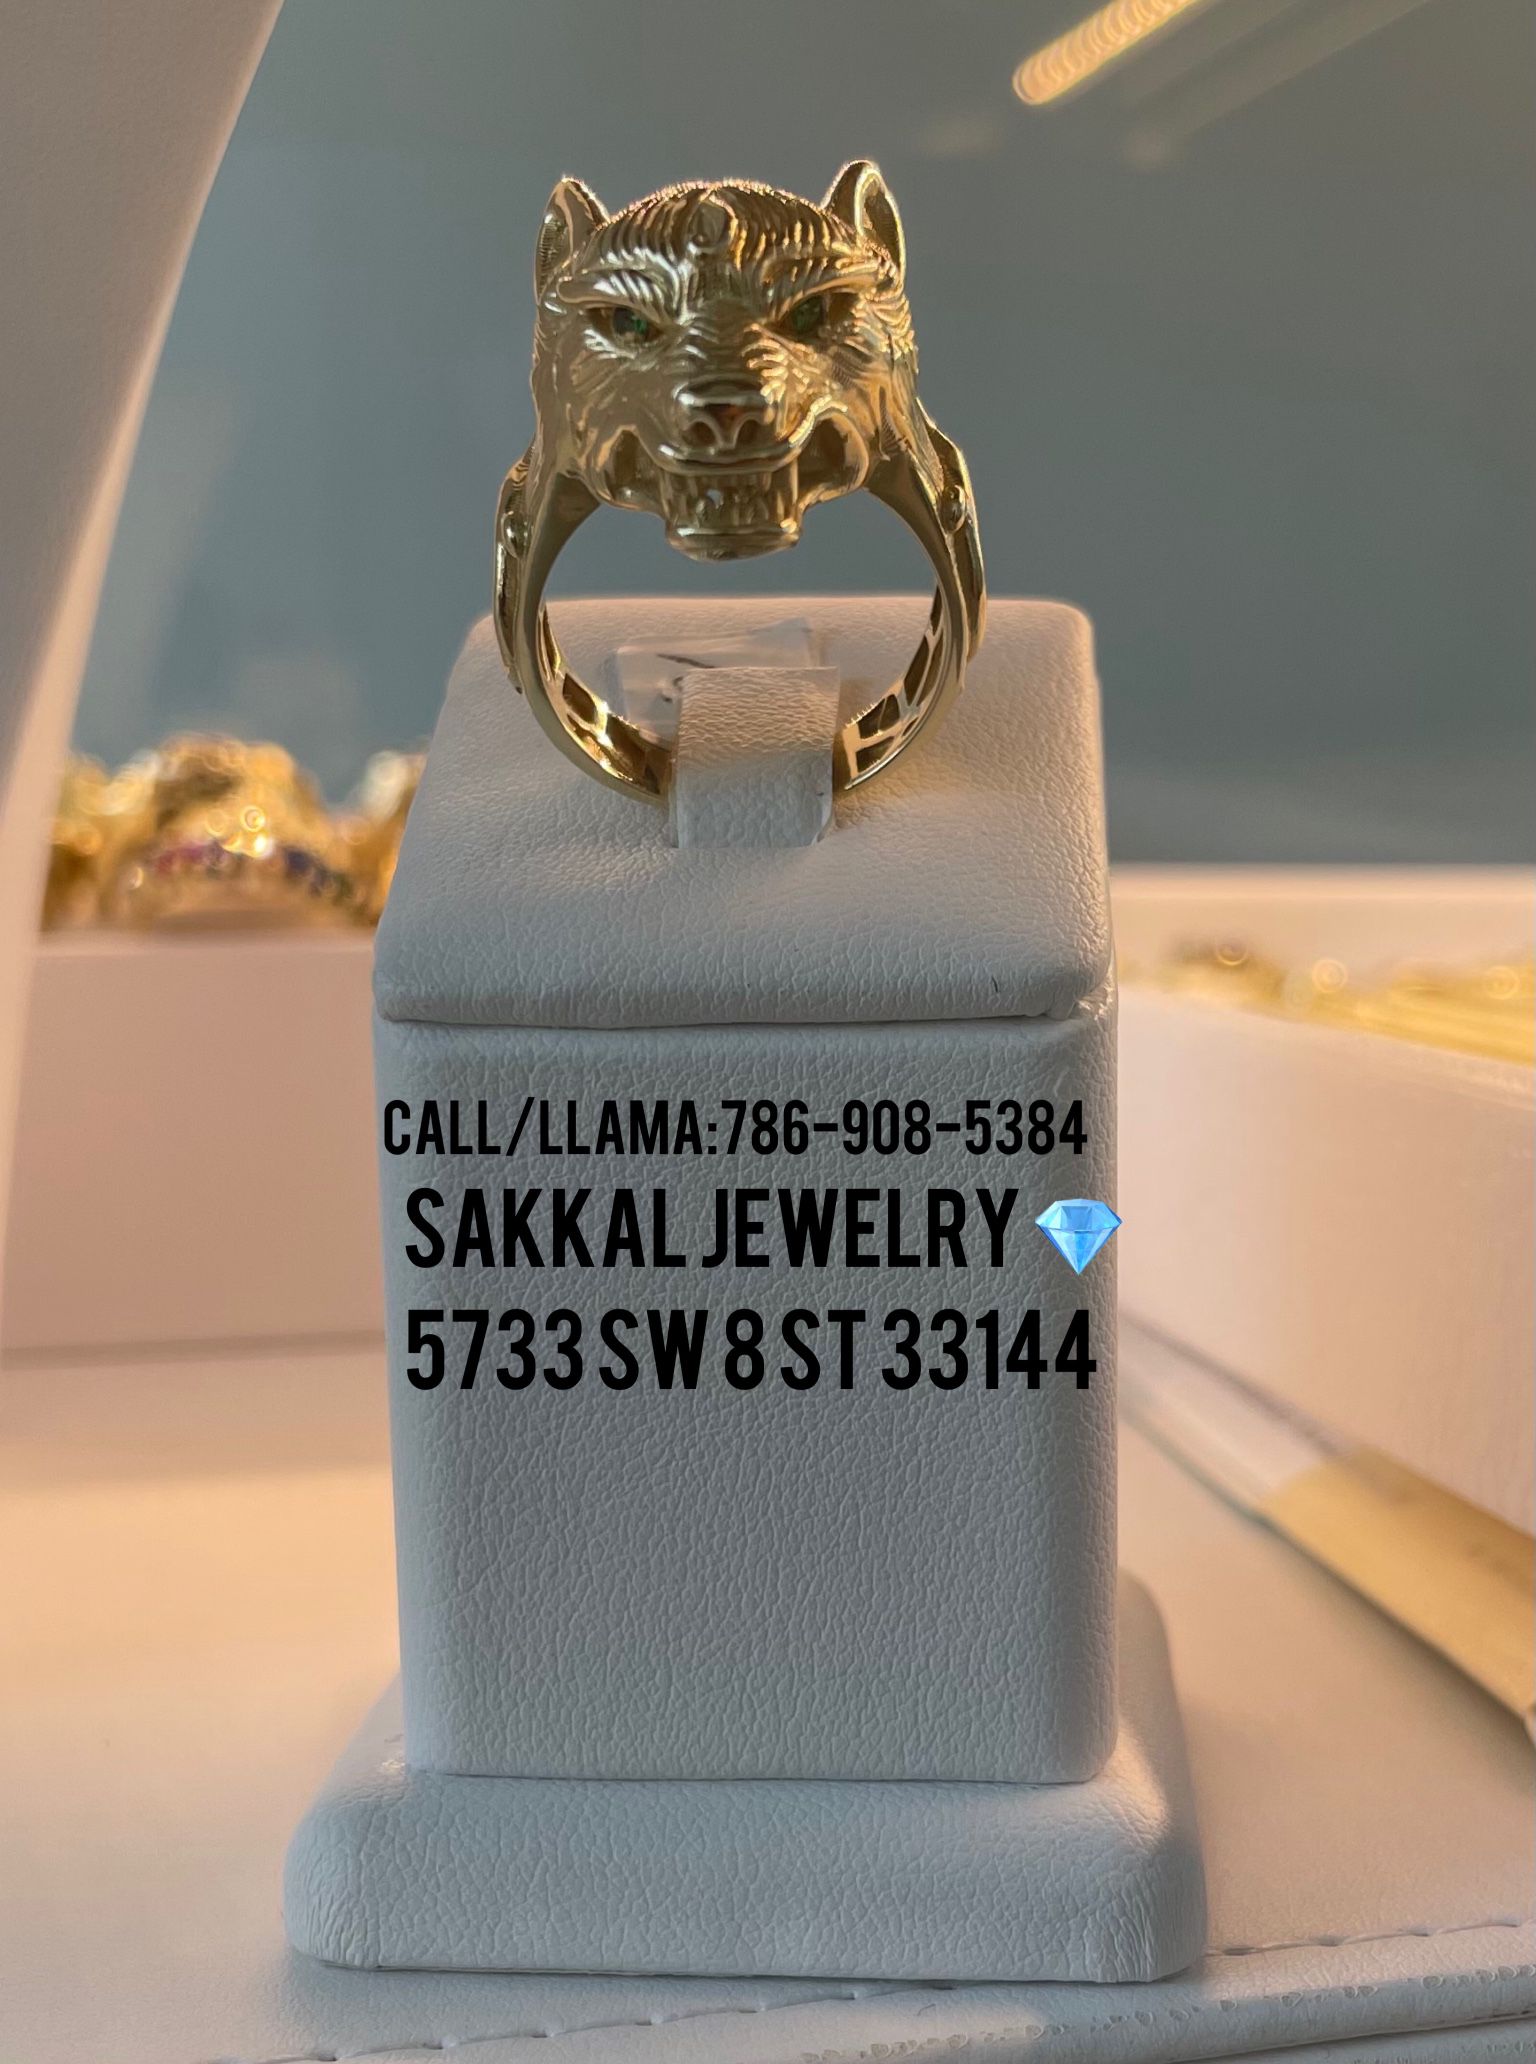 10K Gold Ring Green-Eyed Wolf 🐺. Can Finance Without Credit For $70 